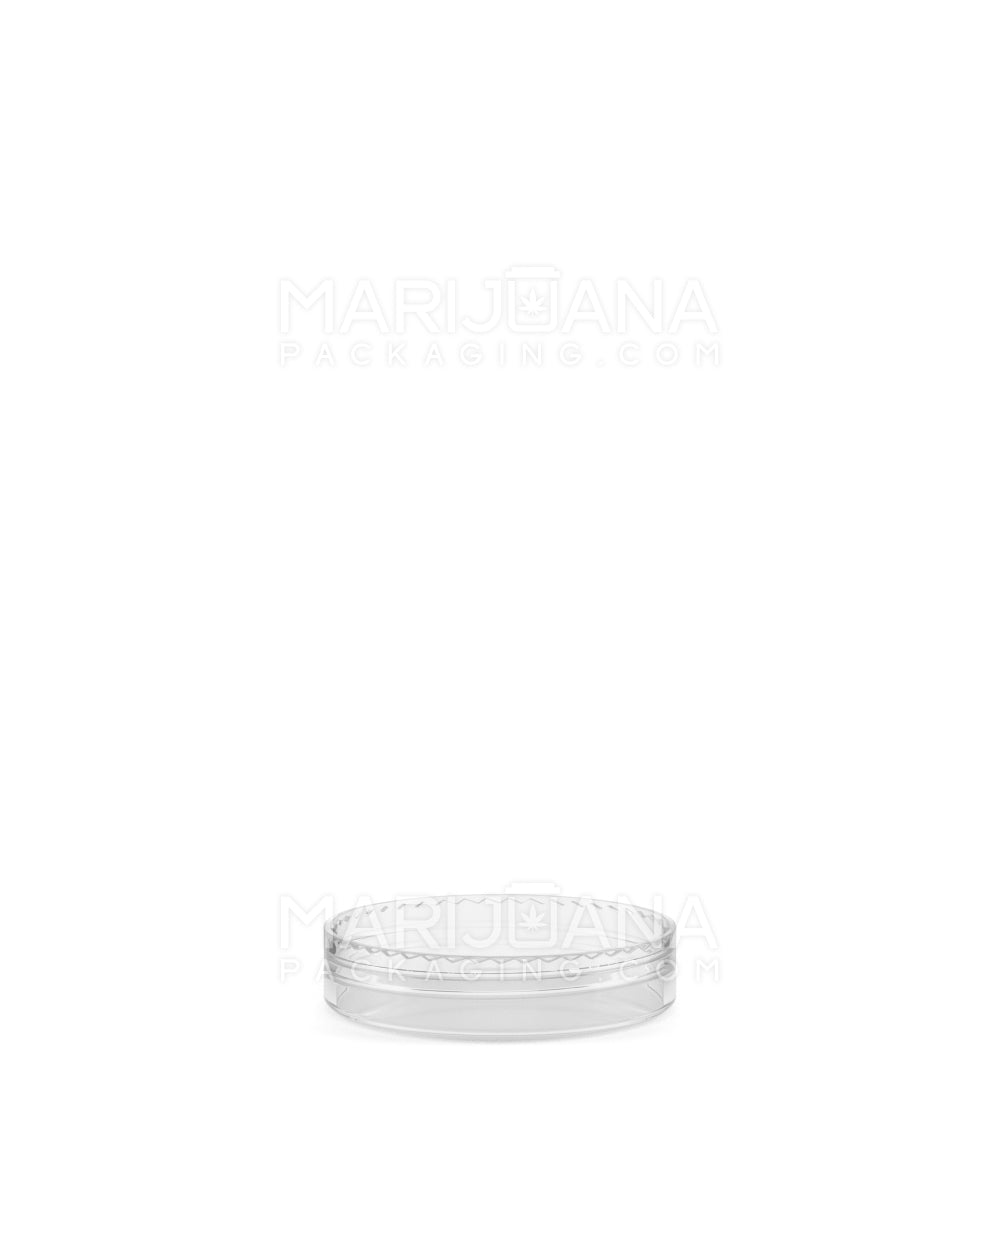 Clear Concentrate Containers w/ Screw Top Cap | 5mL - Plastic - 250 Count - 11